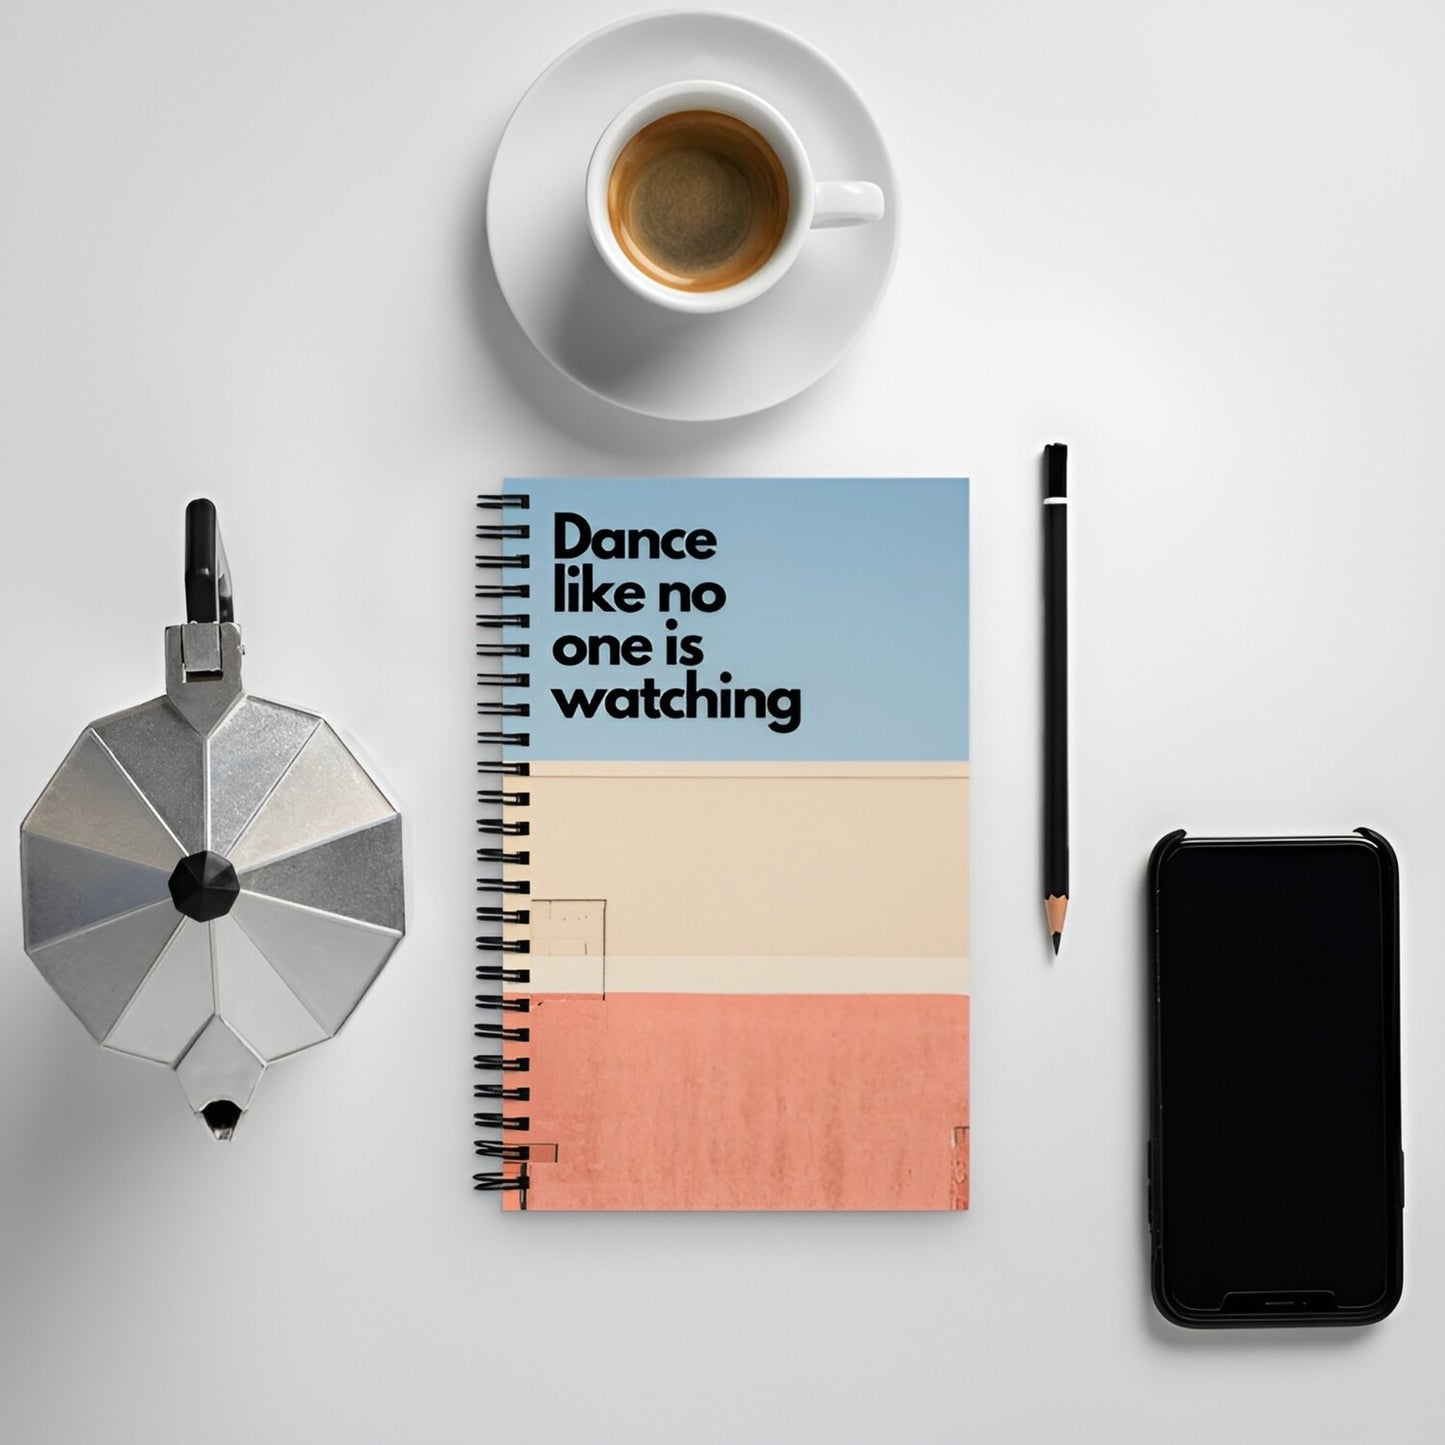 Dance like no one is watching - Spiral notebook inspired by Wes Anderson style